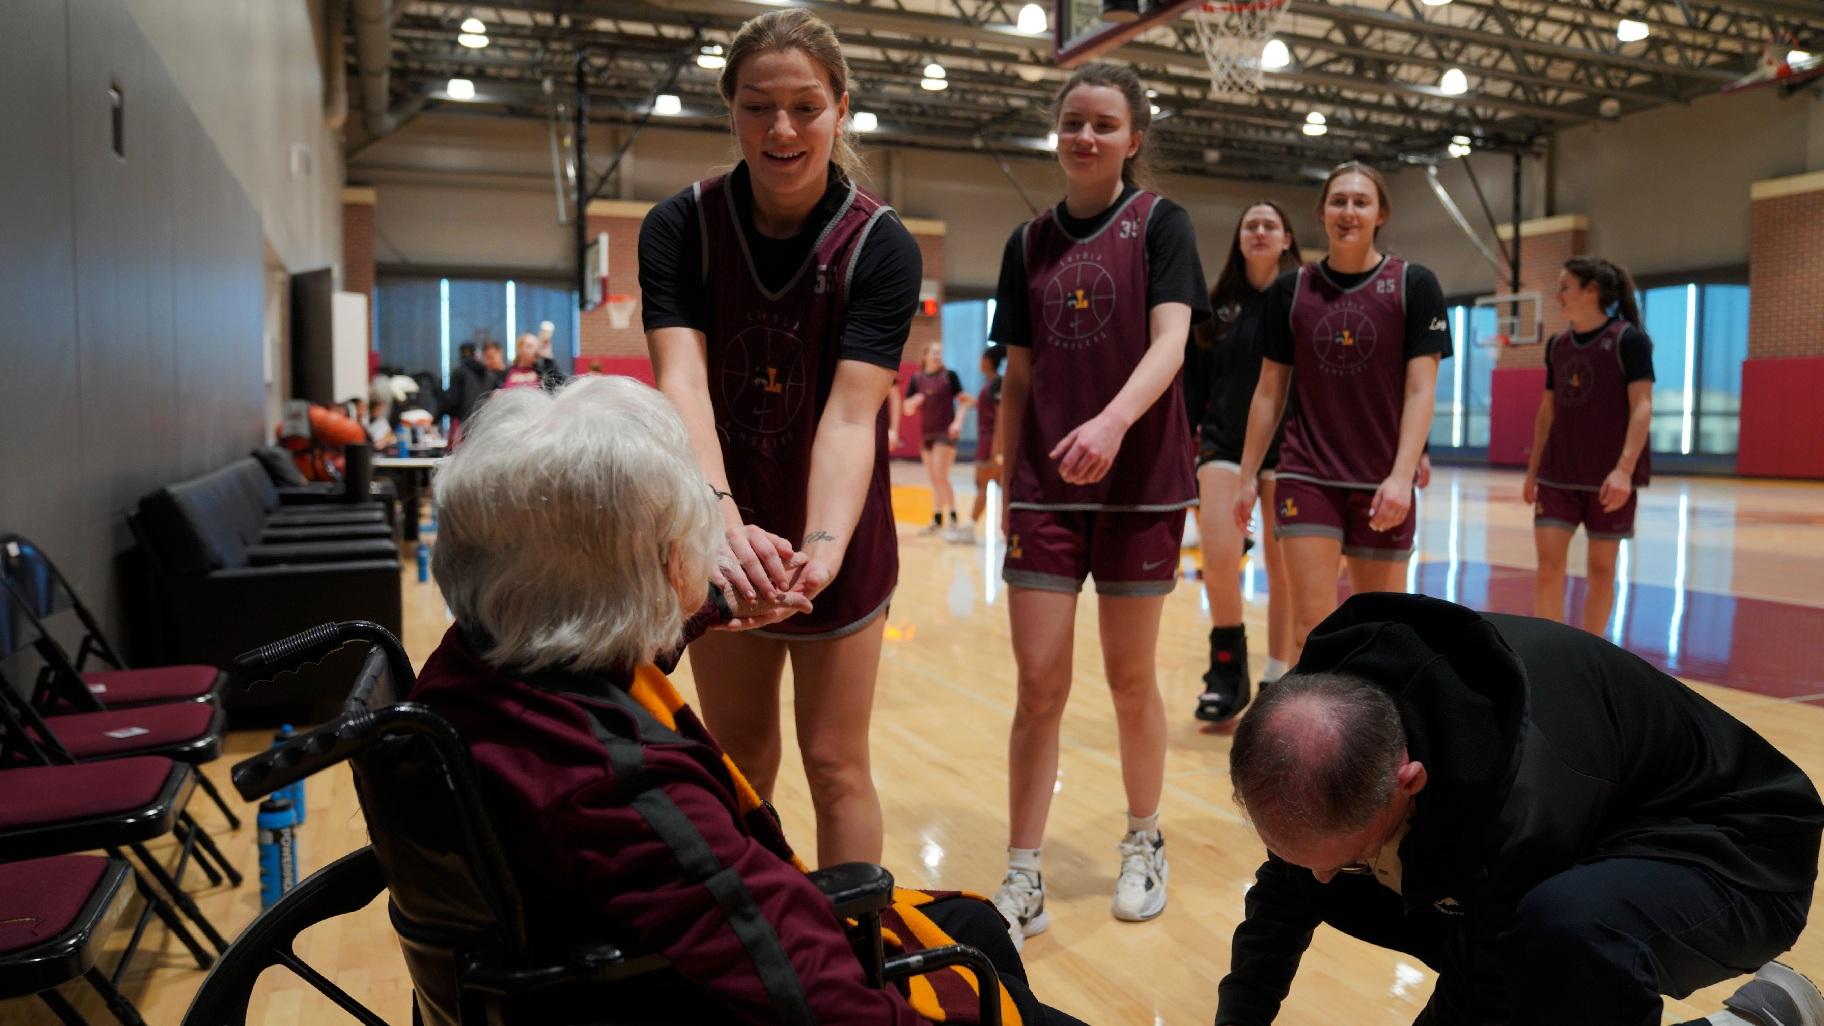 Loyola University women's basketball players greet Sister Jean Dolores Schmidt with a handshake after practice on Monday, Jan. 23, 2023, in Chicago. (AP Photo / Jessie Wardarski)